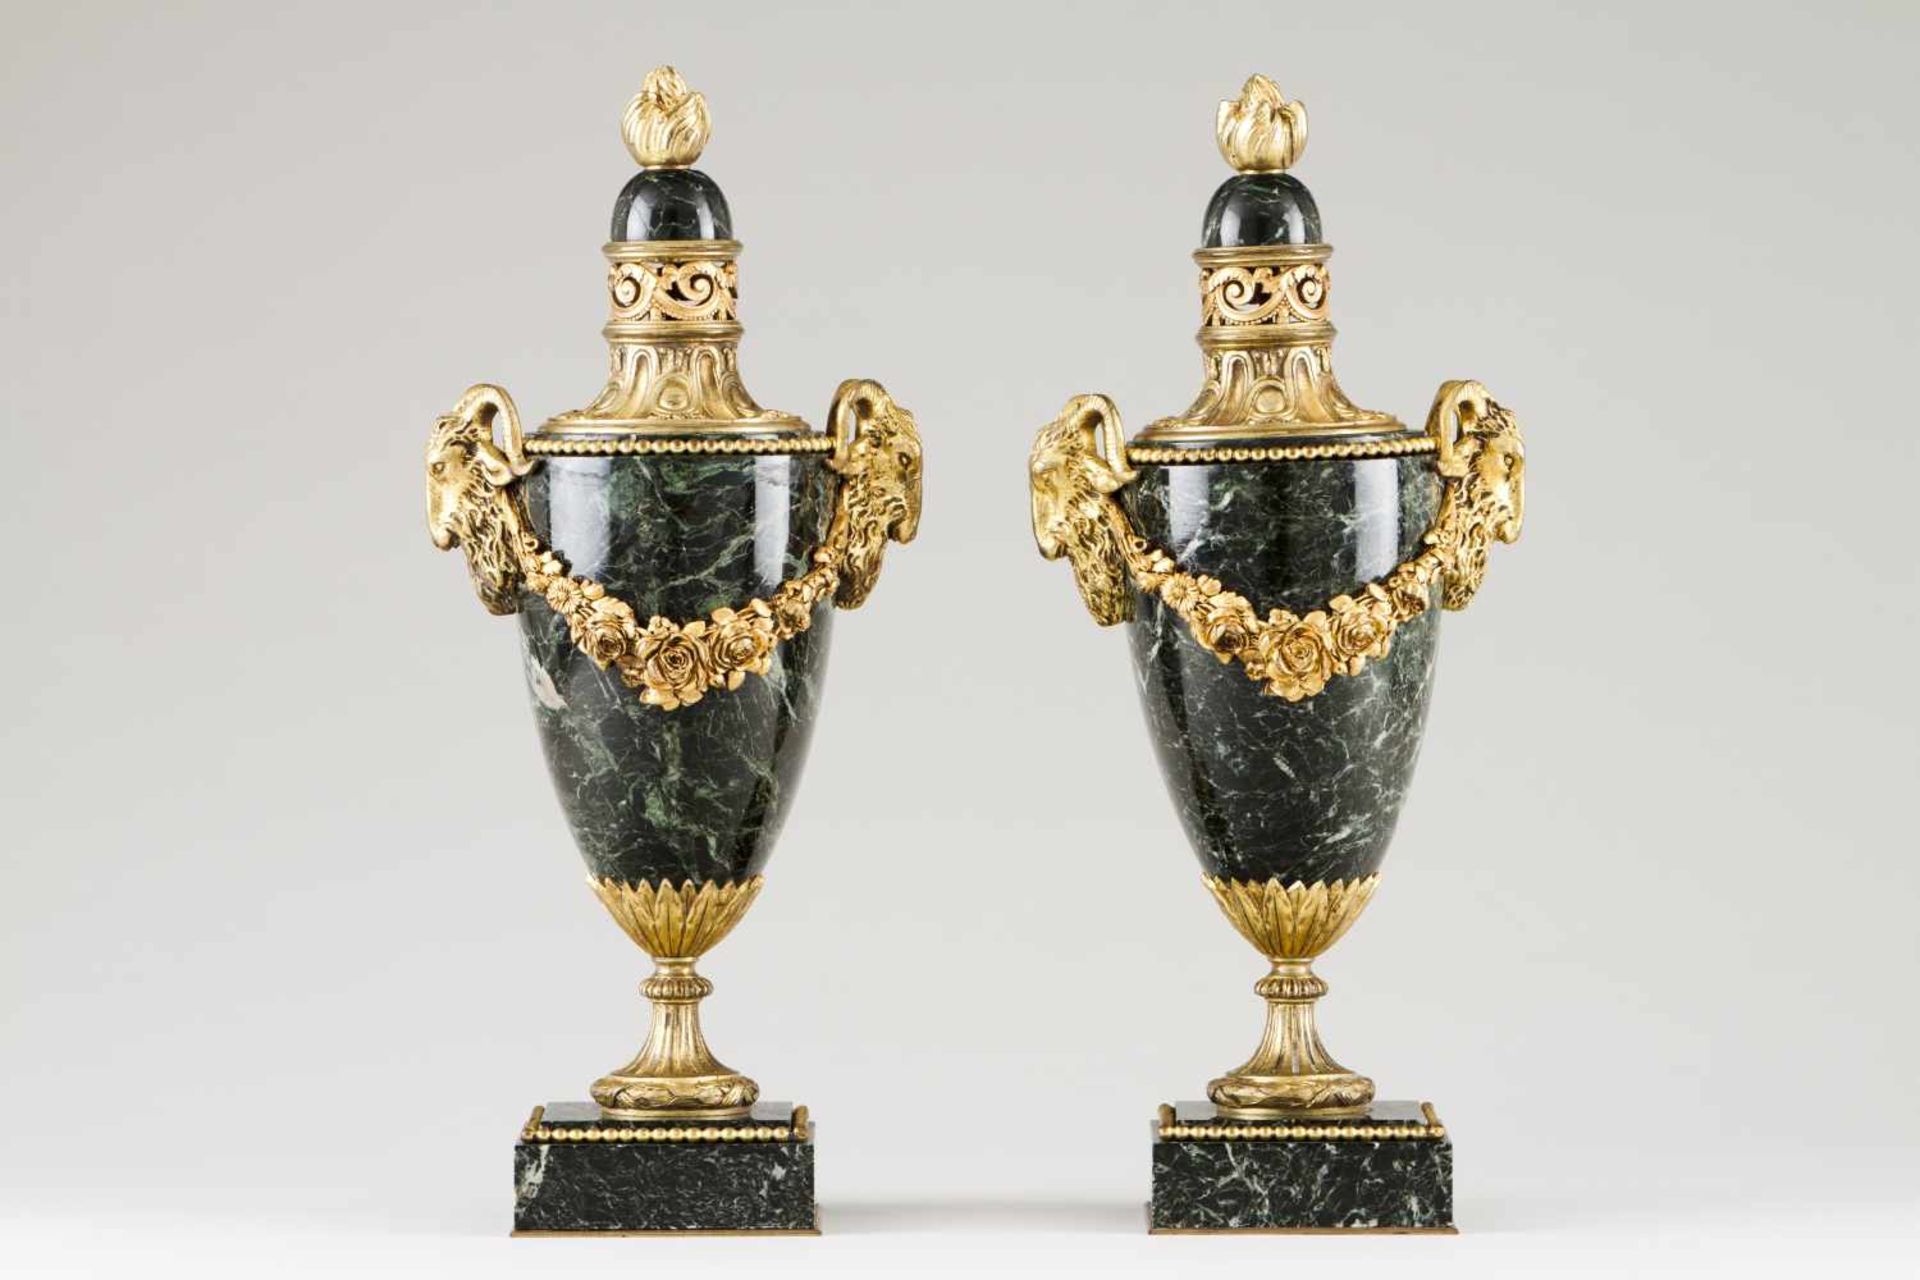 A pair of neoclassical style urns